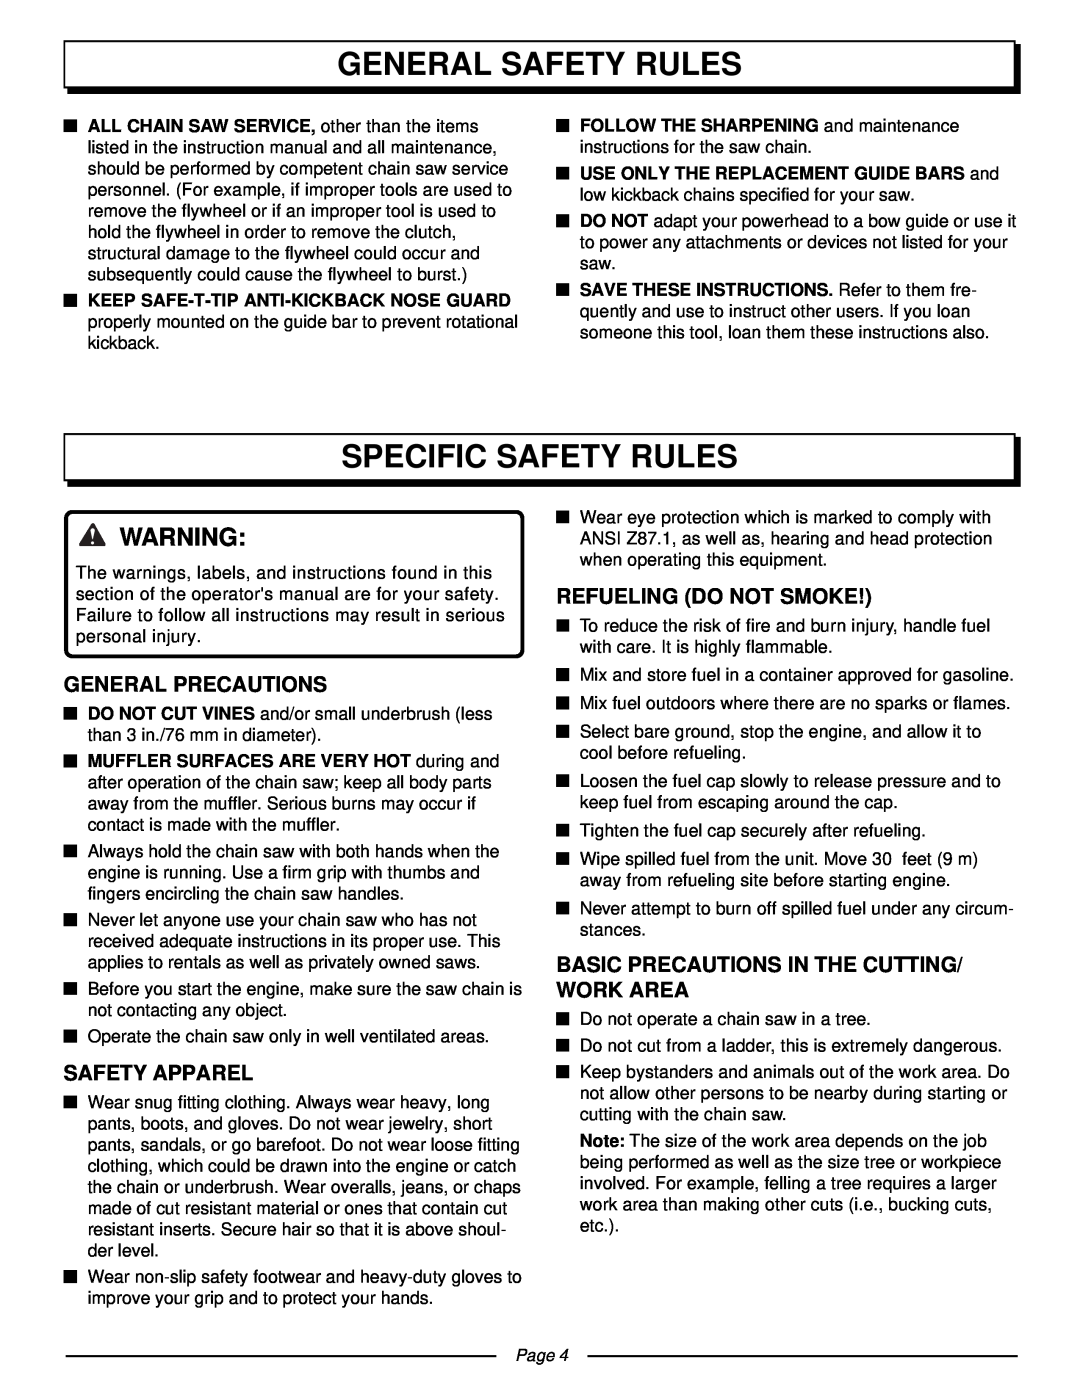 Homelite UT10510 Specific Safety Rules, General Precautions, Safety Apparel, Refueling Do Not Smoke, General Safety Rules 